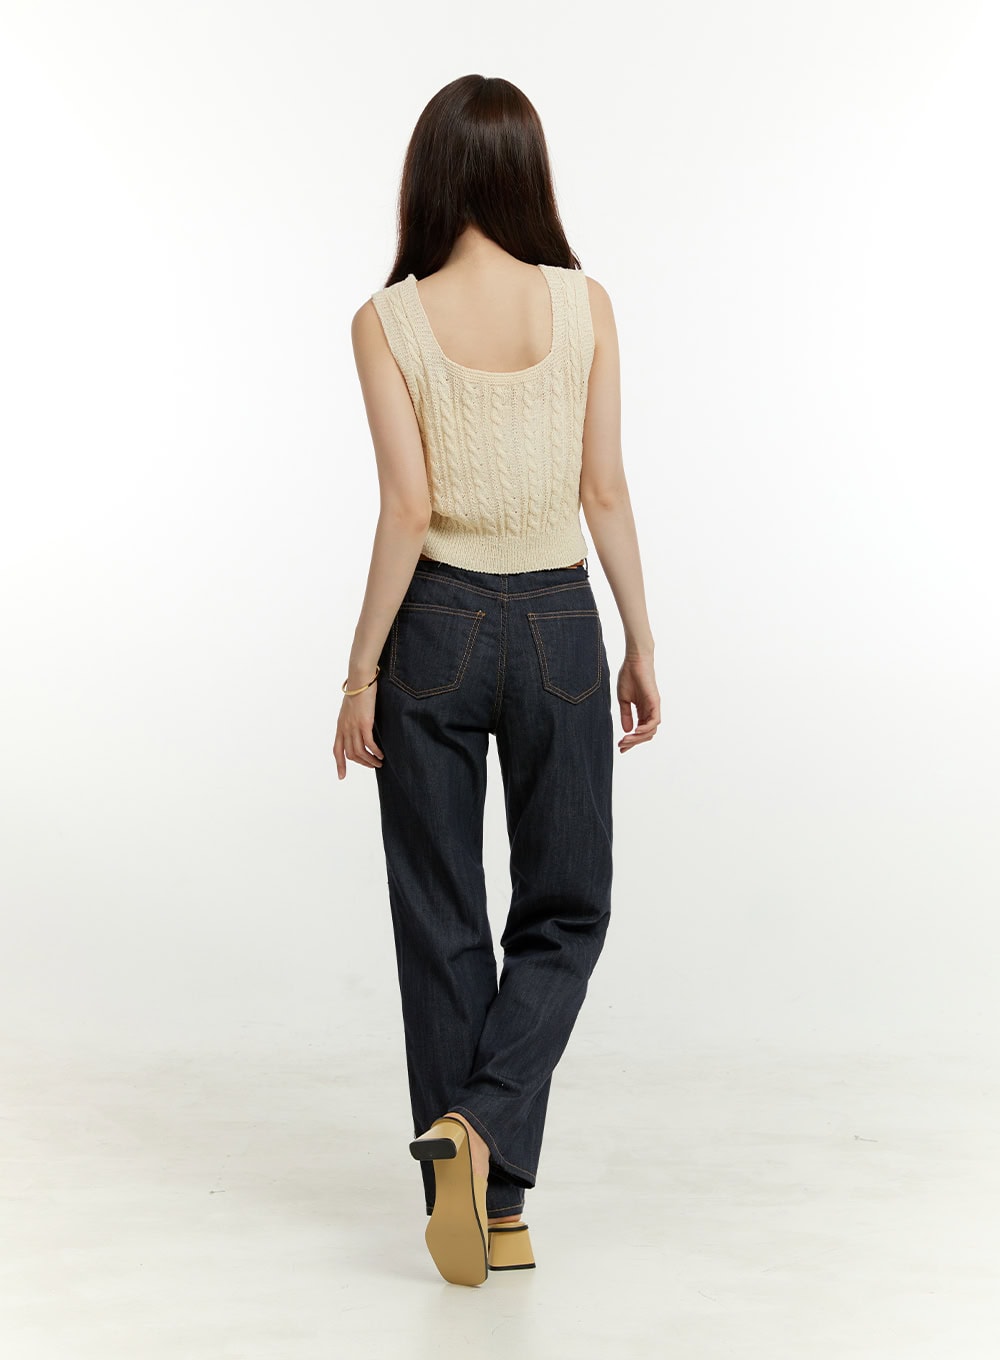 cable-knit-sleeveless-top-ou428